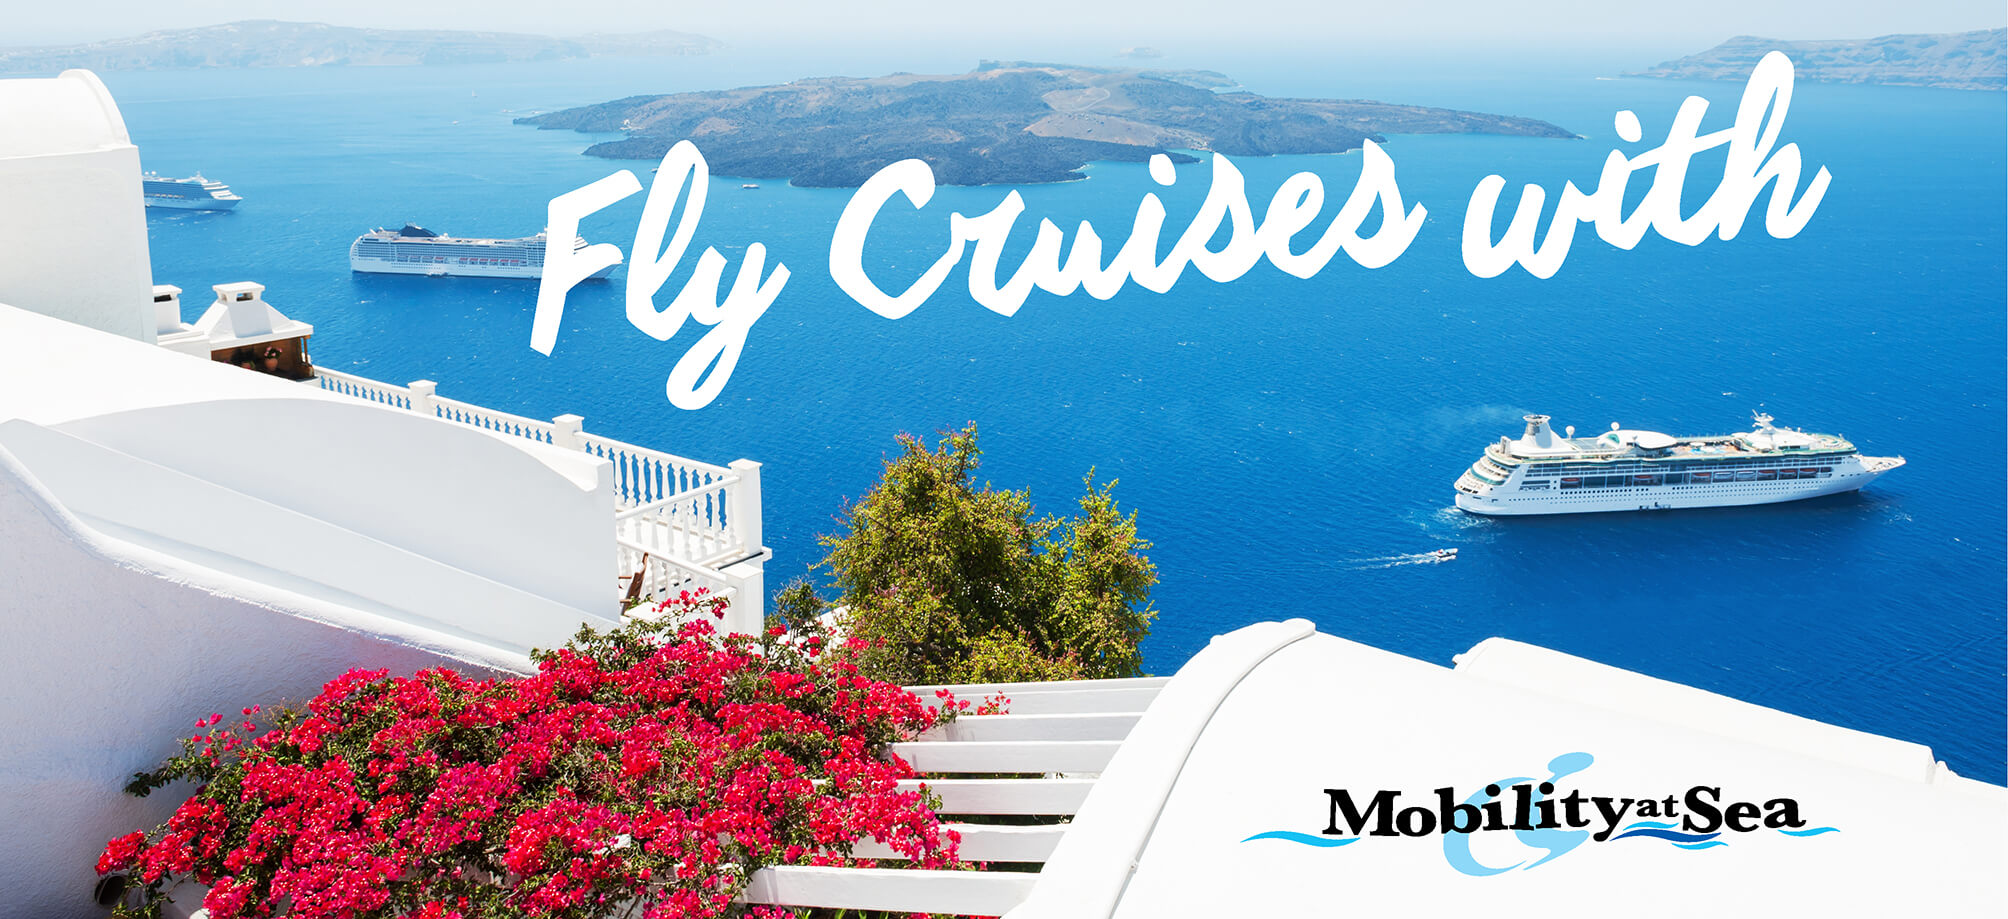 Fly and cruise with Mobility at Sea